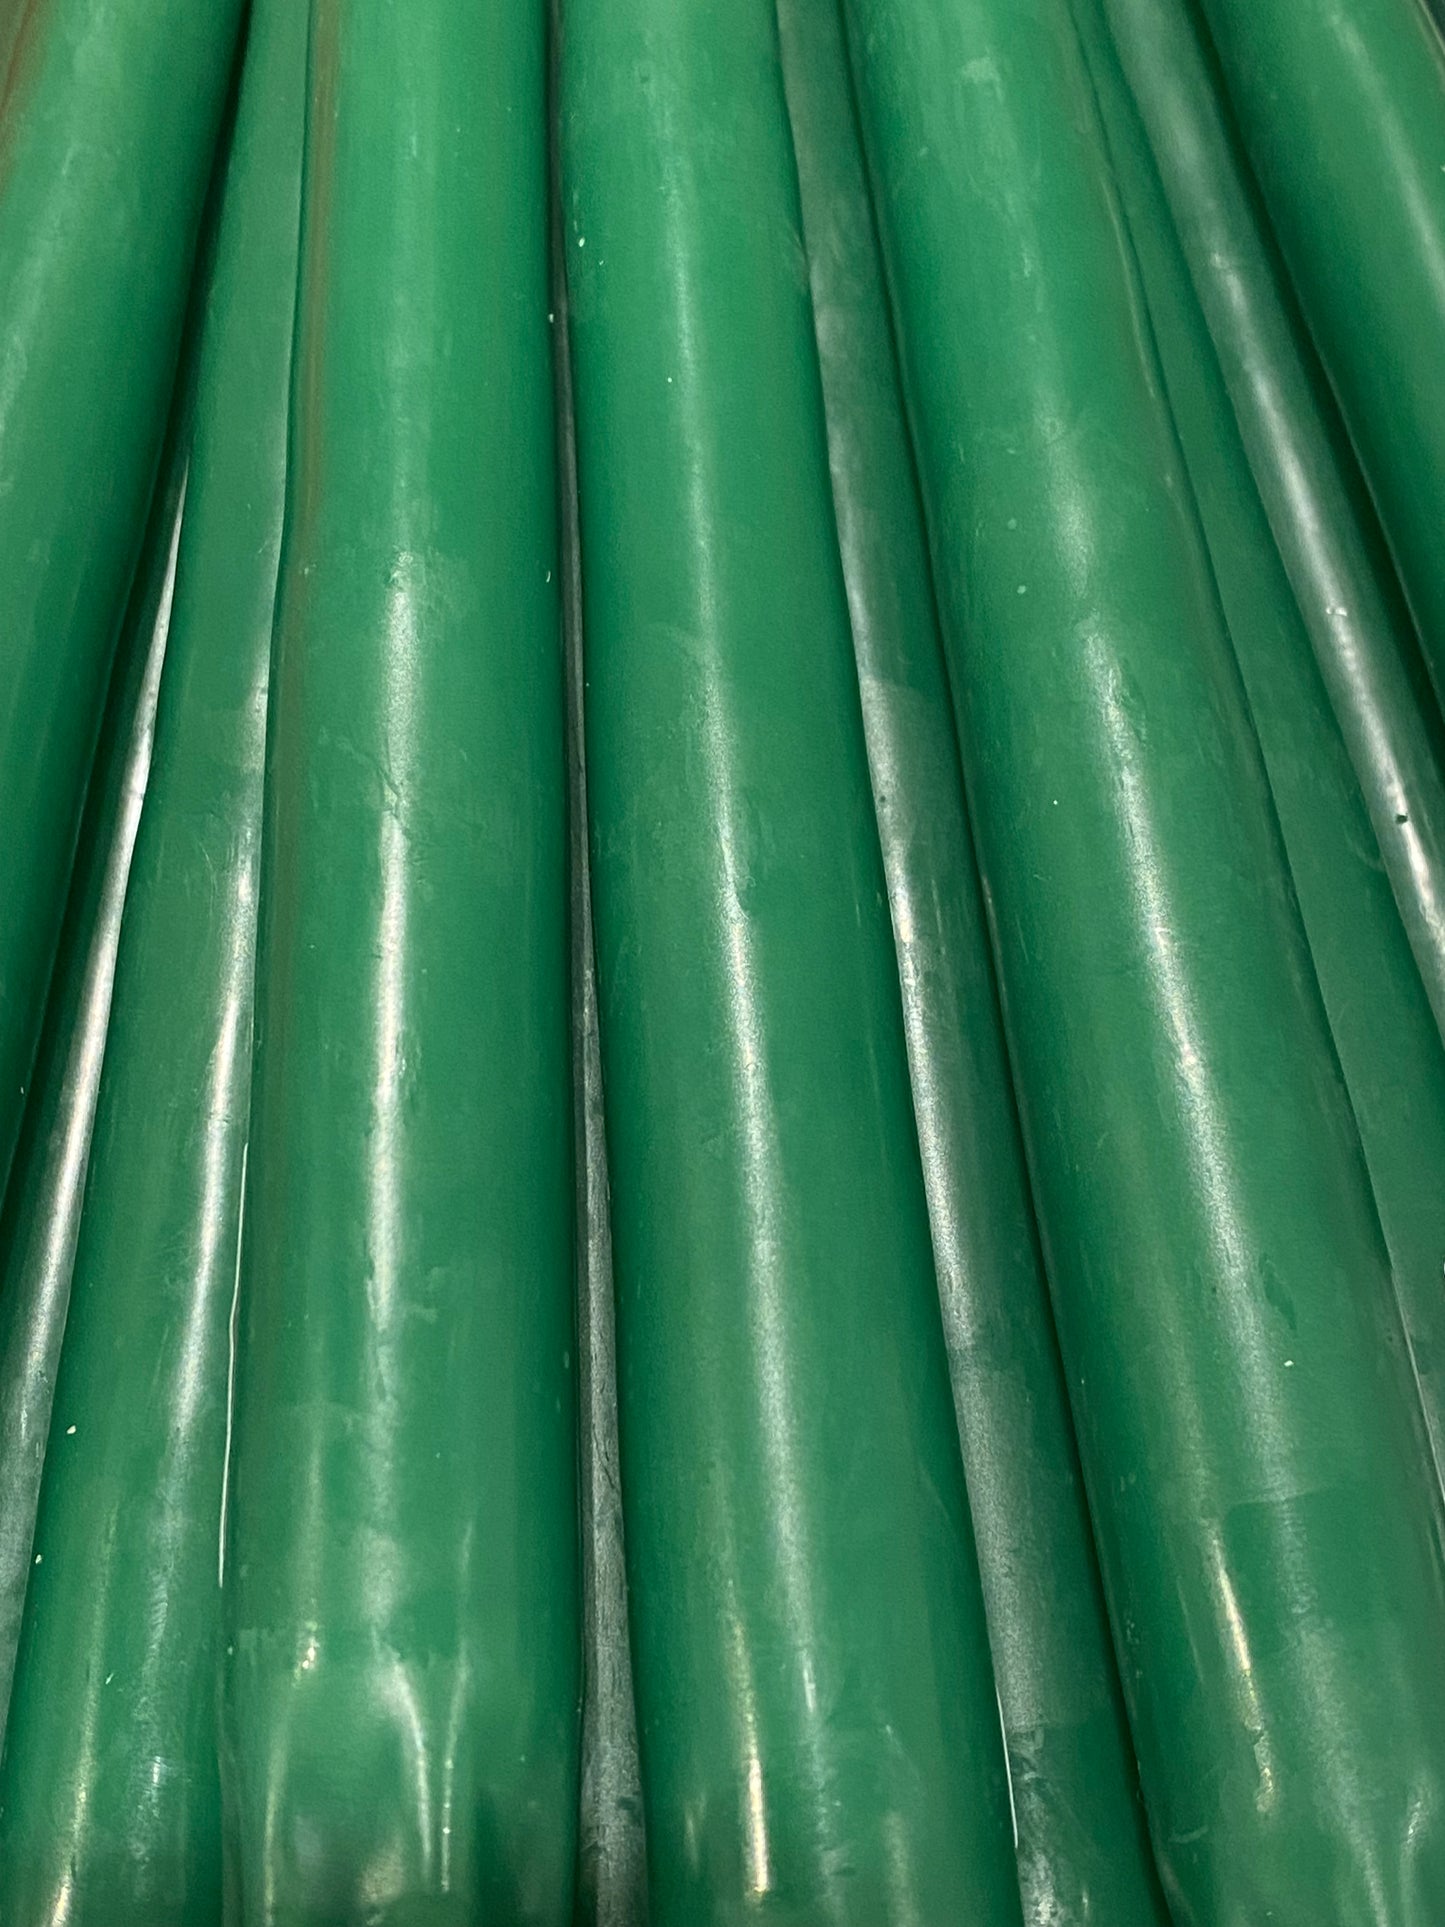 Taper Candle | Green | 12 inch | Dripless | Smokeless with self-fitted end